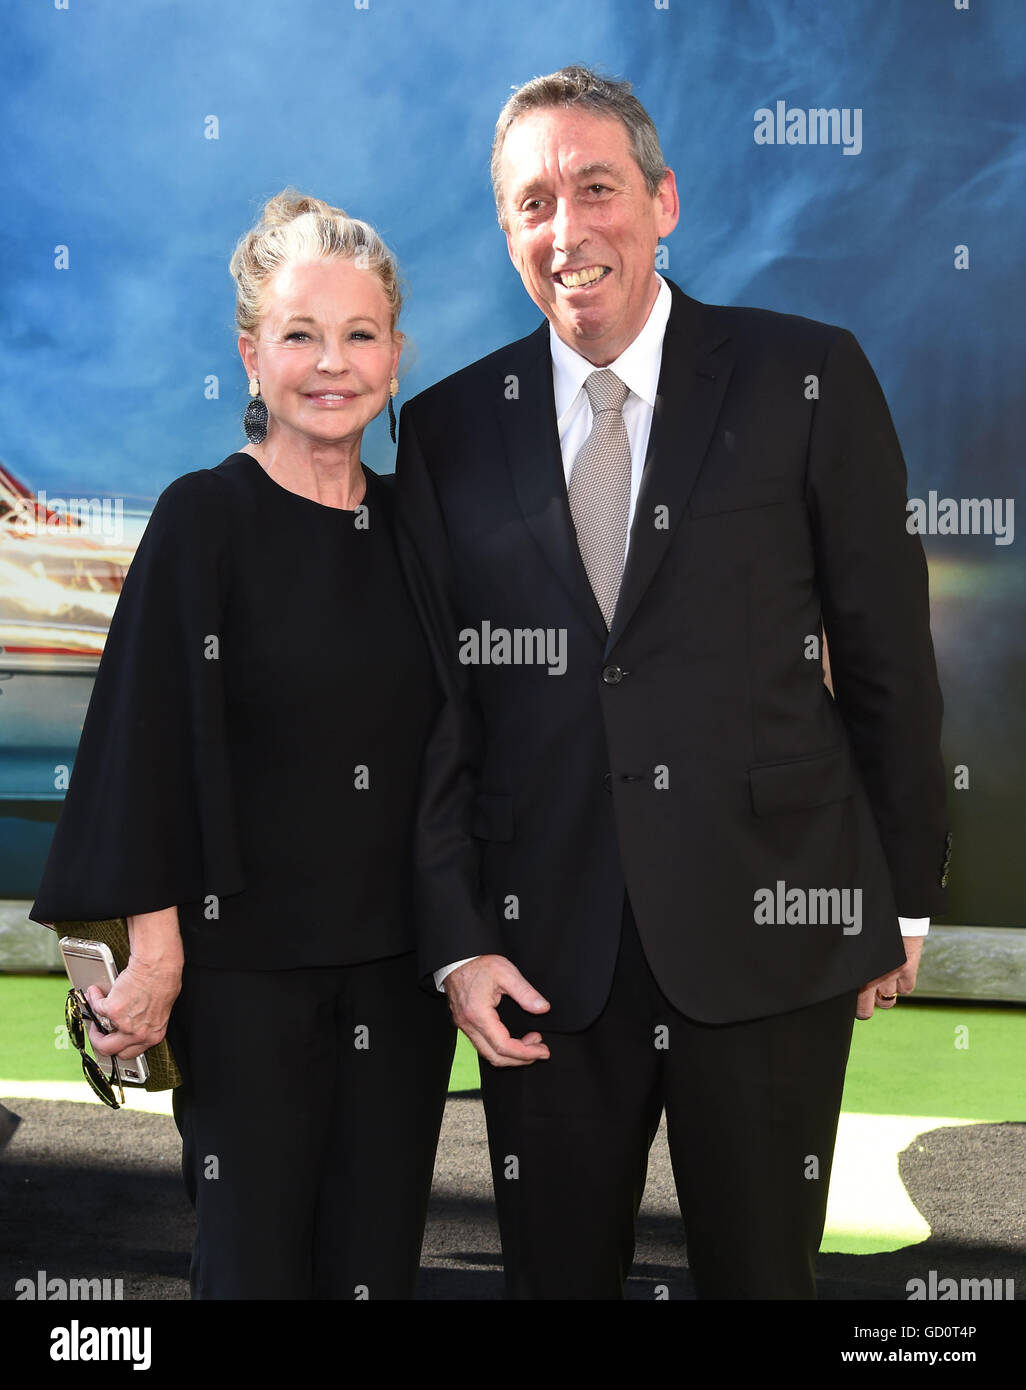 Hollywood, California, USA. 9th July, 2016. Ivan Reitman & Genevieve Robert arrives for the premiere of the film 'Ghostbusters' at the Chinese Theatre. © Lisa O'Connor/ZUMA Wire/Alamy Live News Stock Photo